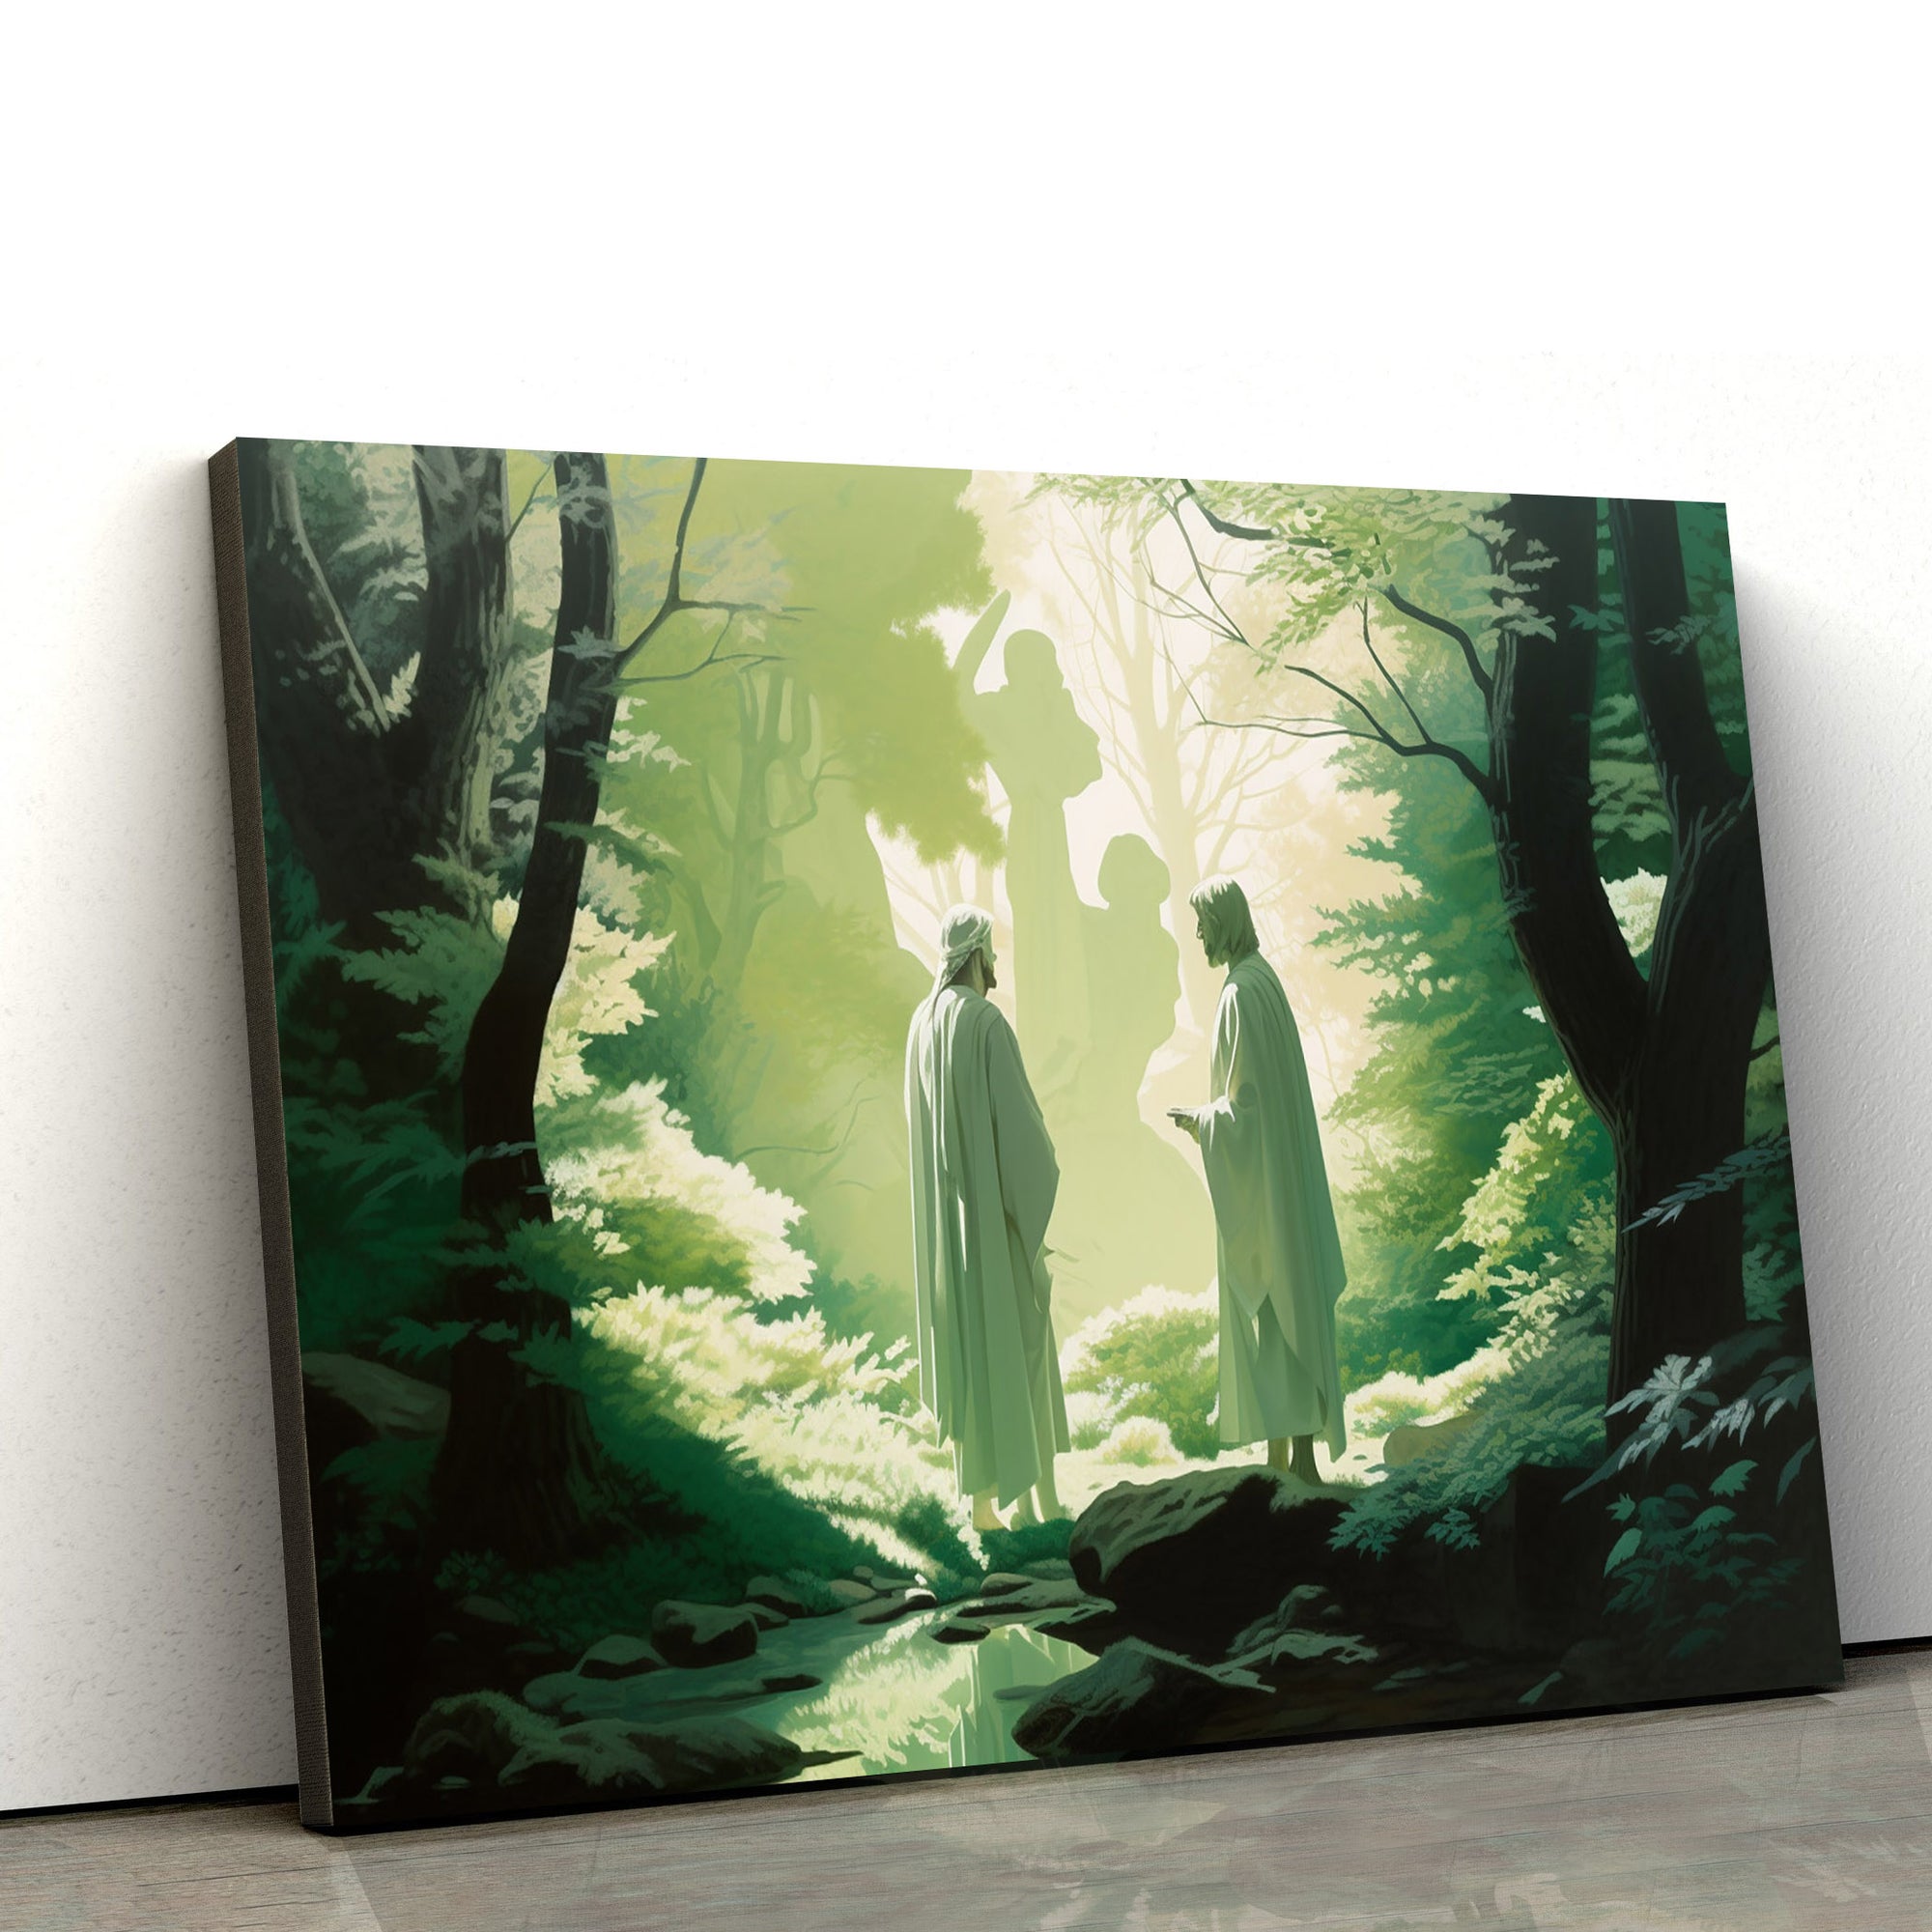 Jesus And John Standing In The Woods - Canvas Picture - Jesus Christ Canvas - Christian Wall Art